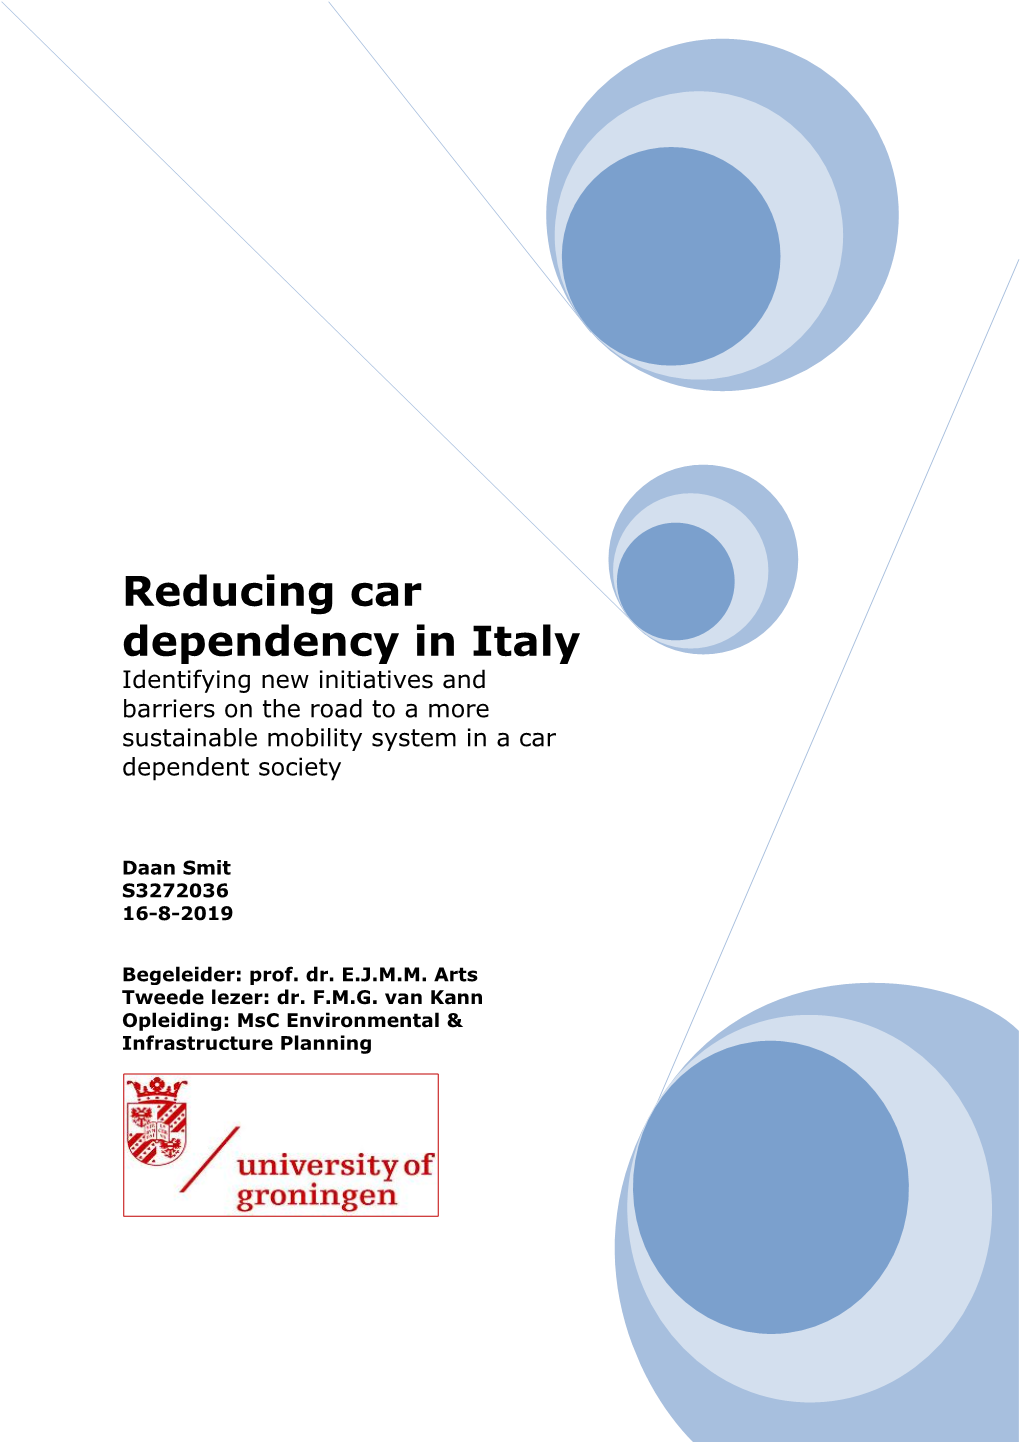 Reducing Car Dependency in Italy Identifying New Initiatives and Barriers on the Road to a More Sustainable Mobility System in a Car Dependent Society